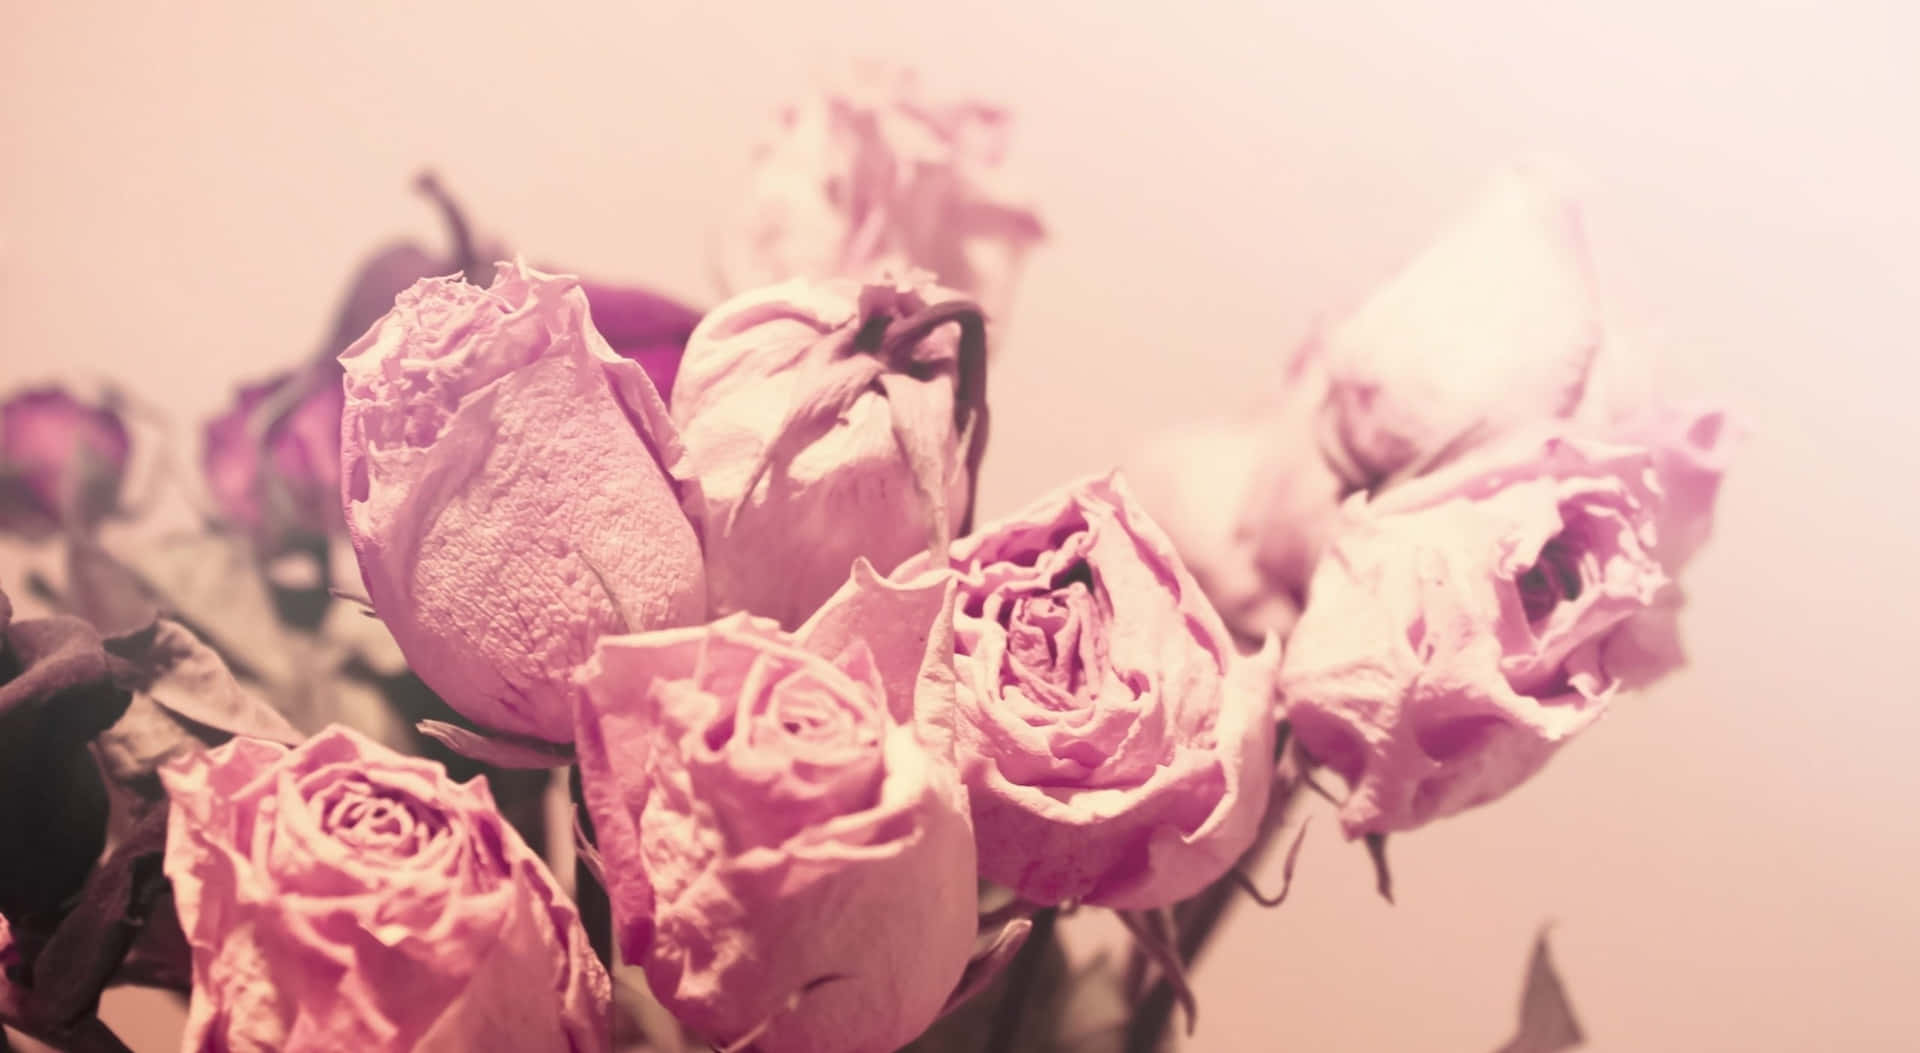 1440p Pink Aesthetic Withered Roses Background